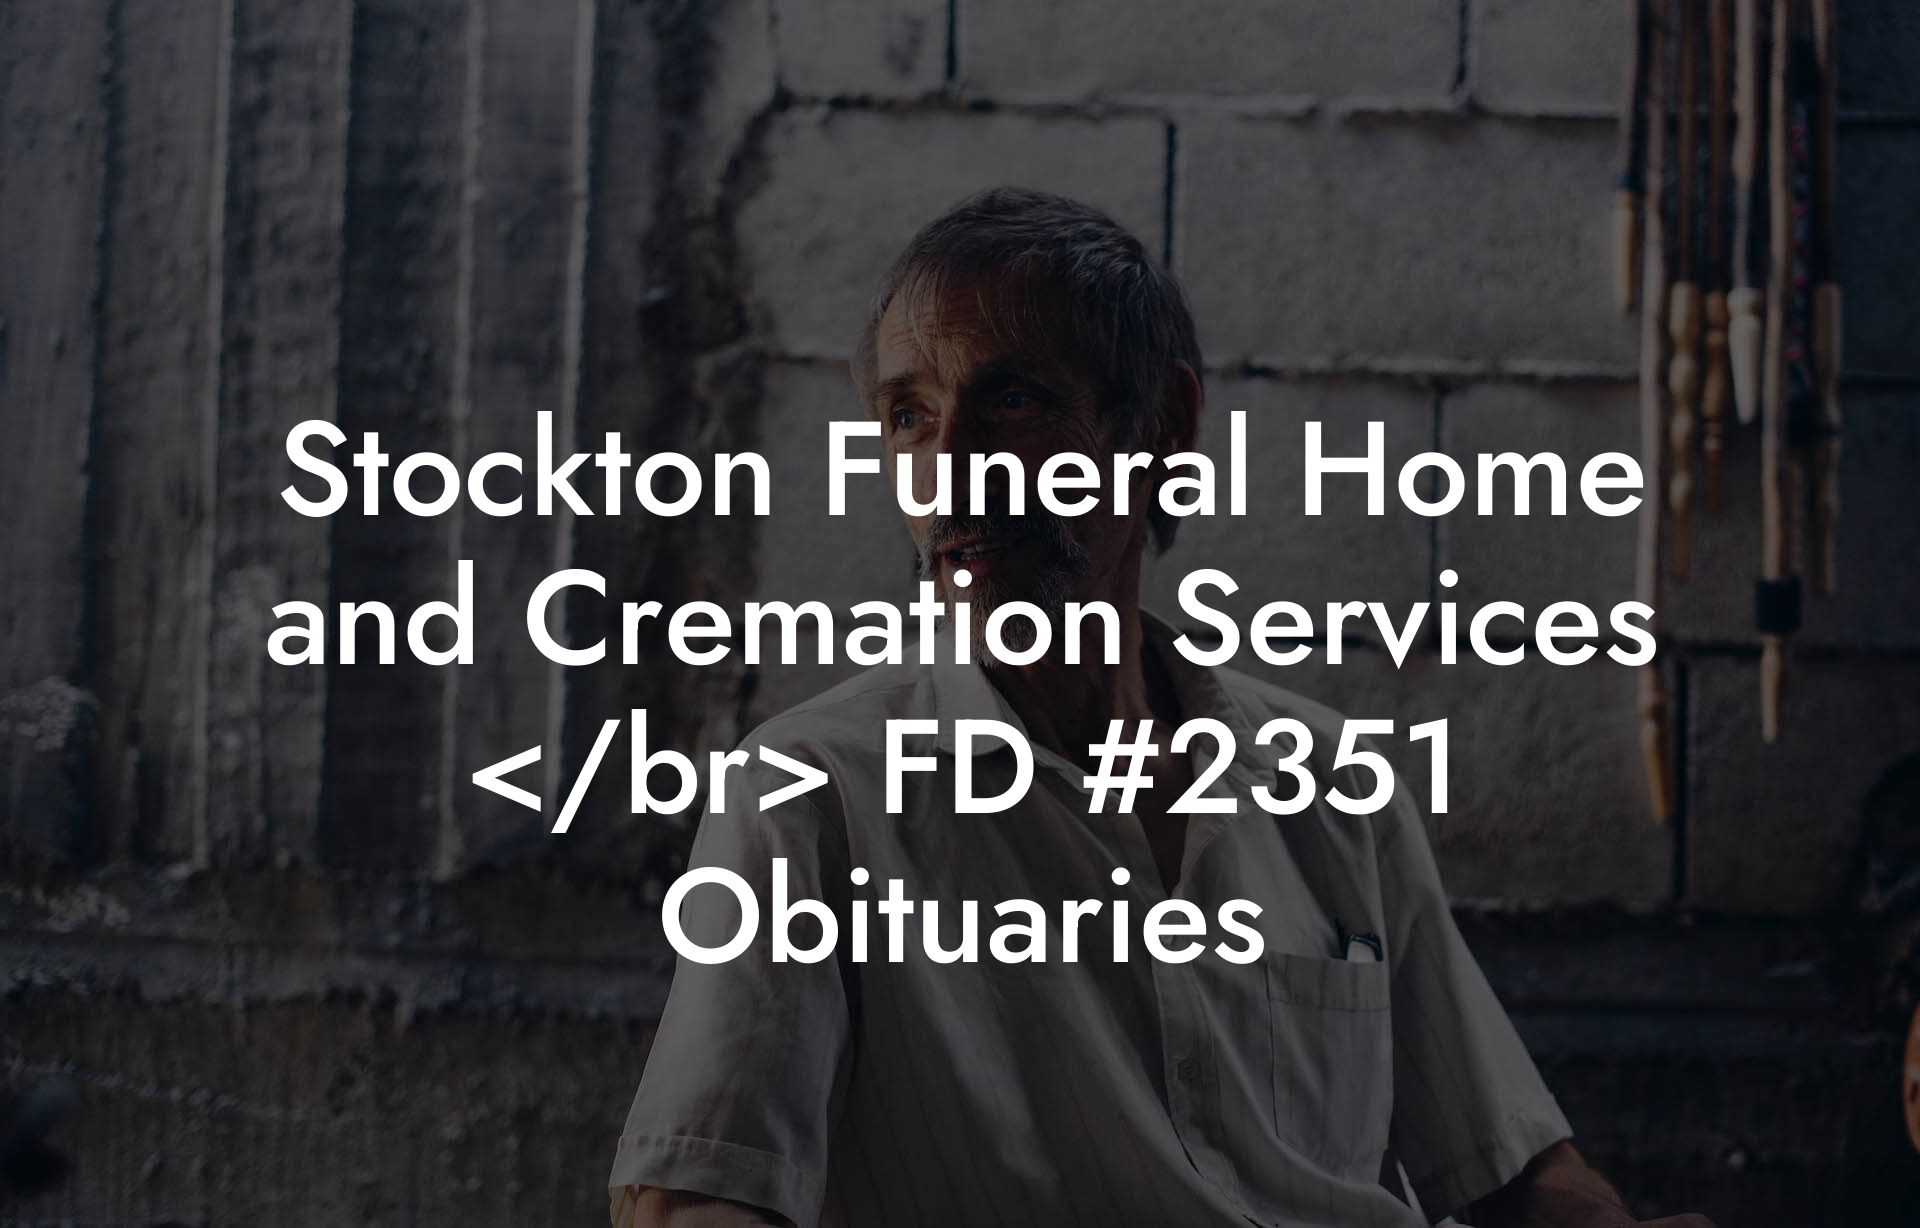 Stockton Funeral Home and Cremation Services  FD #2351 Obituaries